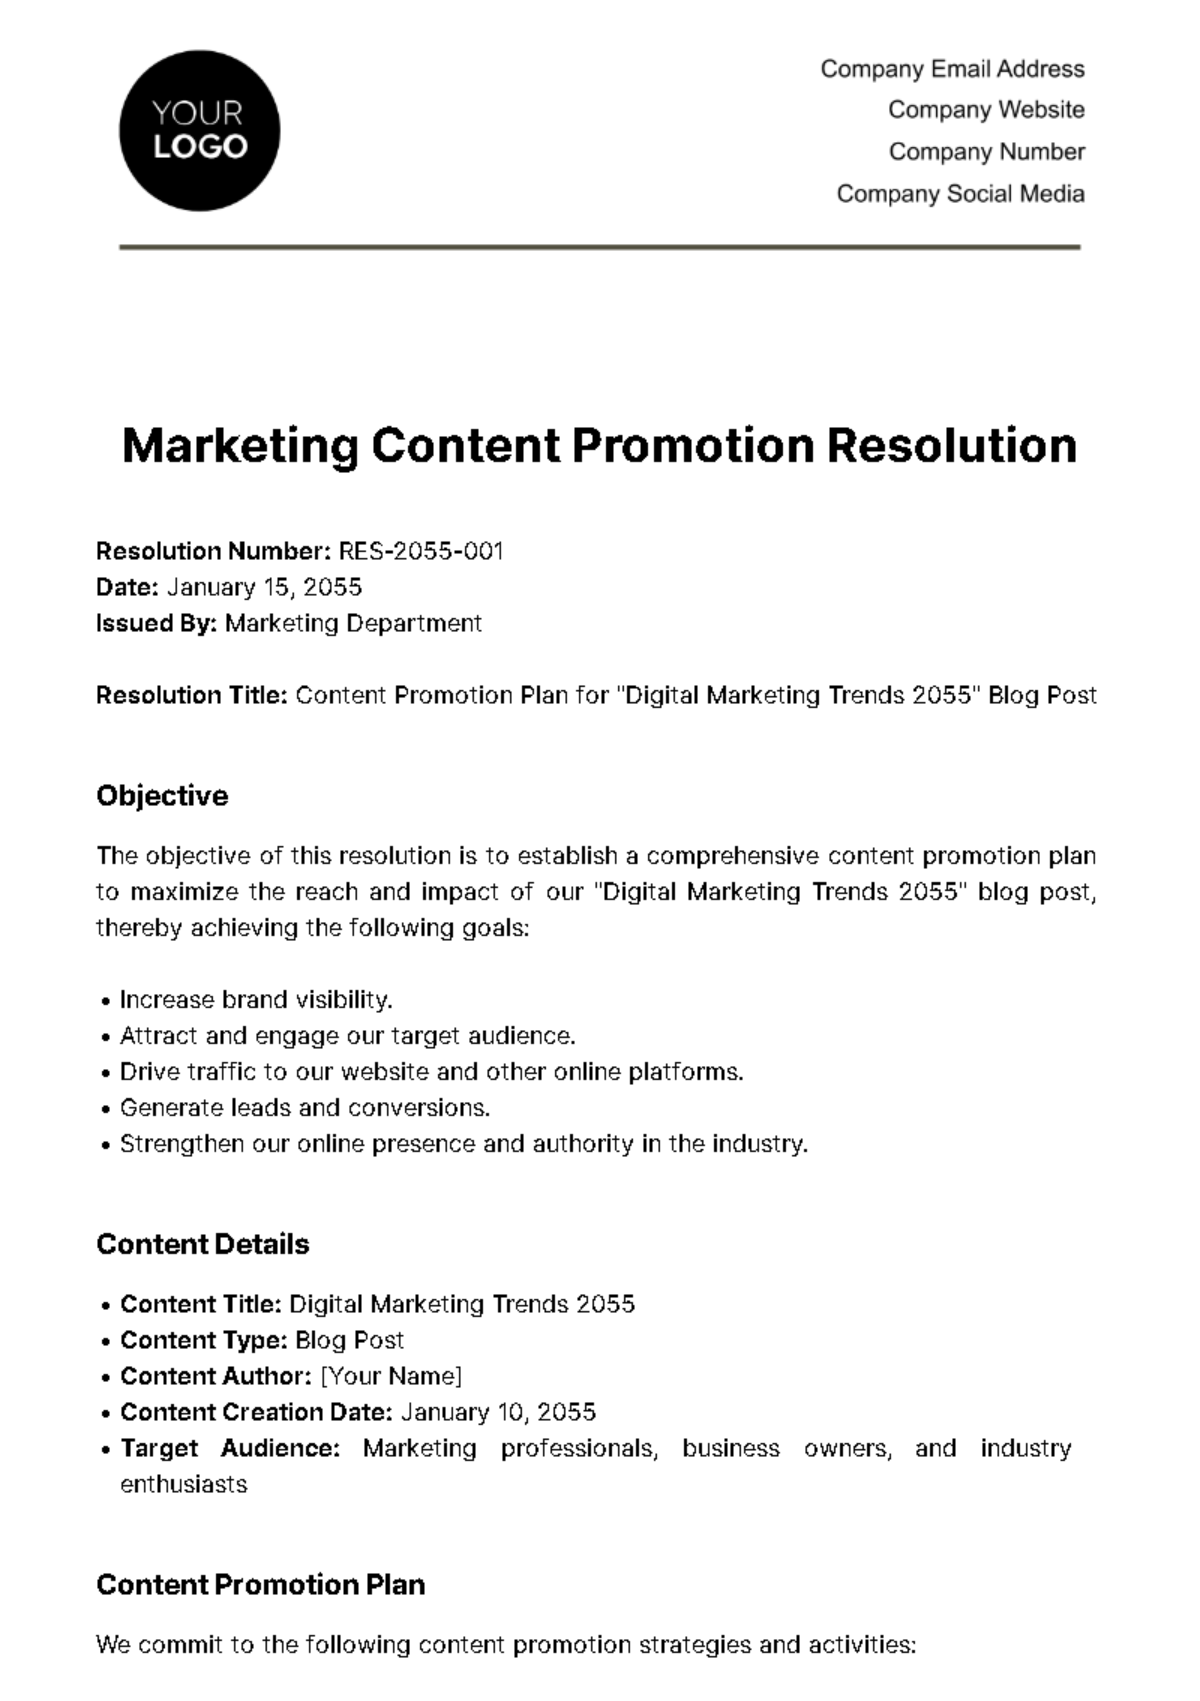 Free Marketing Content Promotion Resolution Template